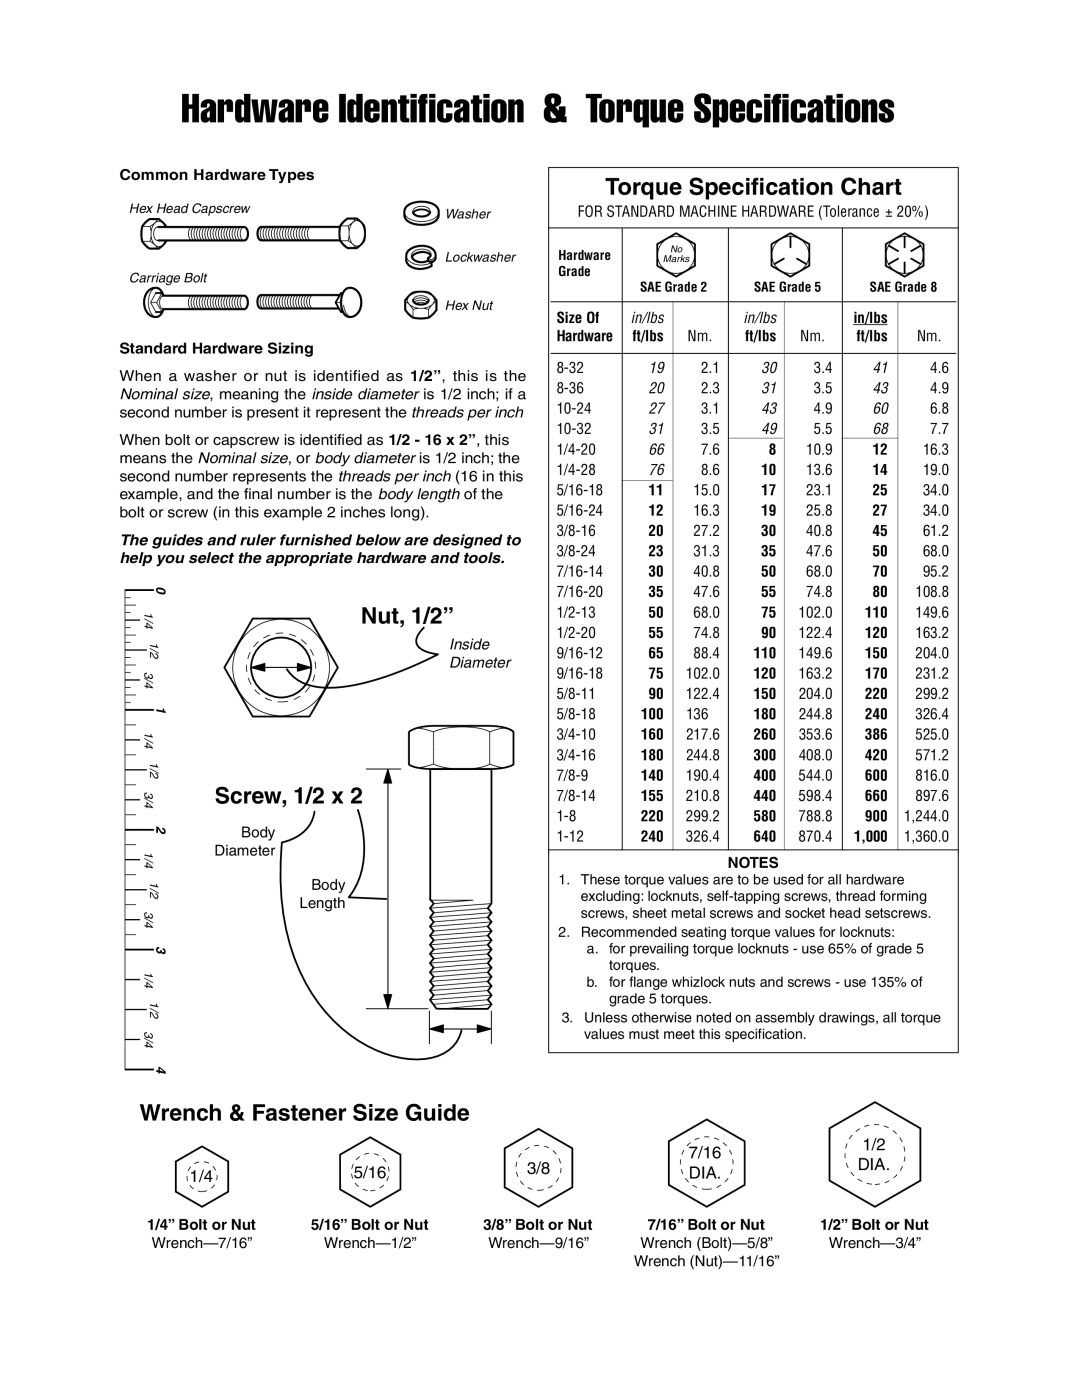 Snapper 4535 Wrench & Fastener Size Guide, Hardware Identification & Torque Specifications, Torque Specification Chart 